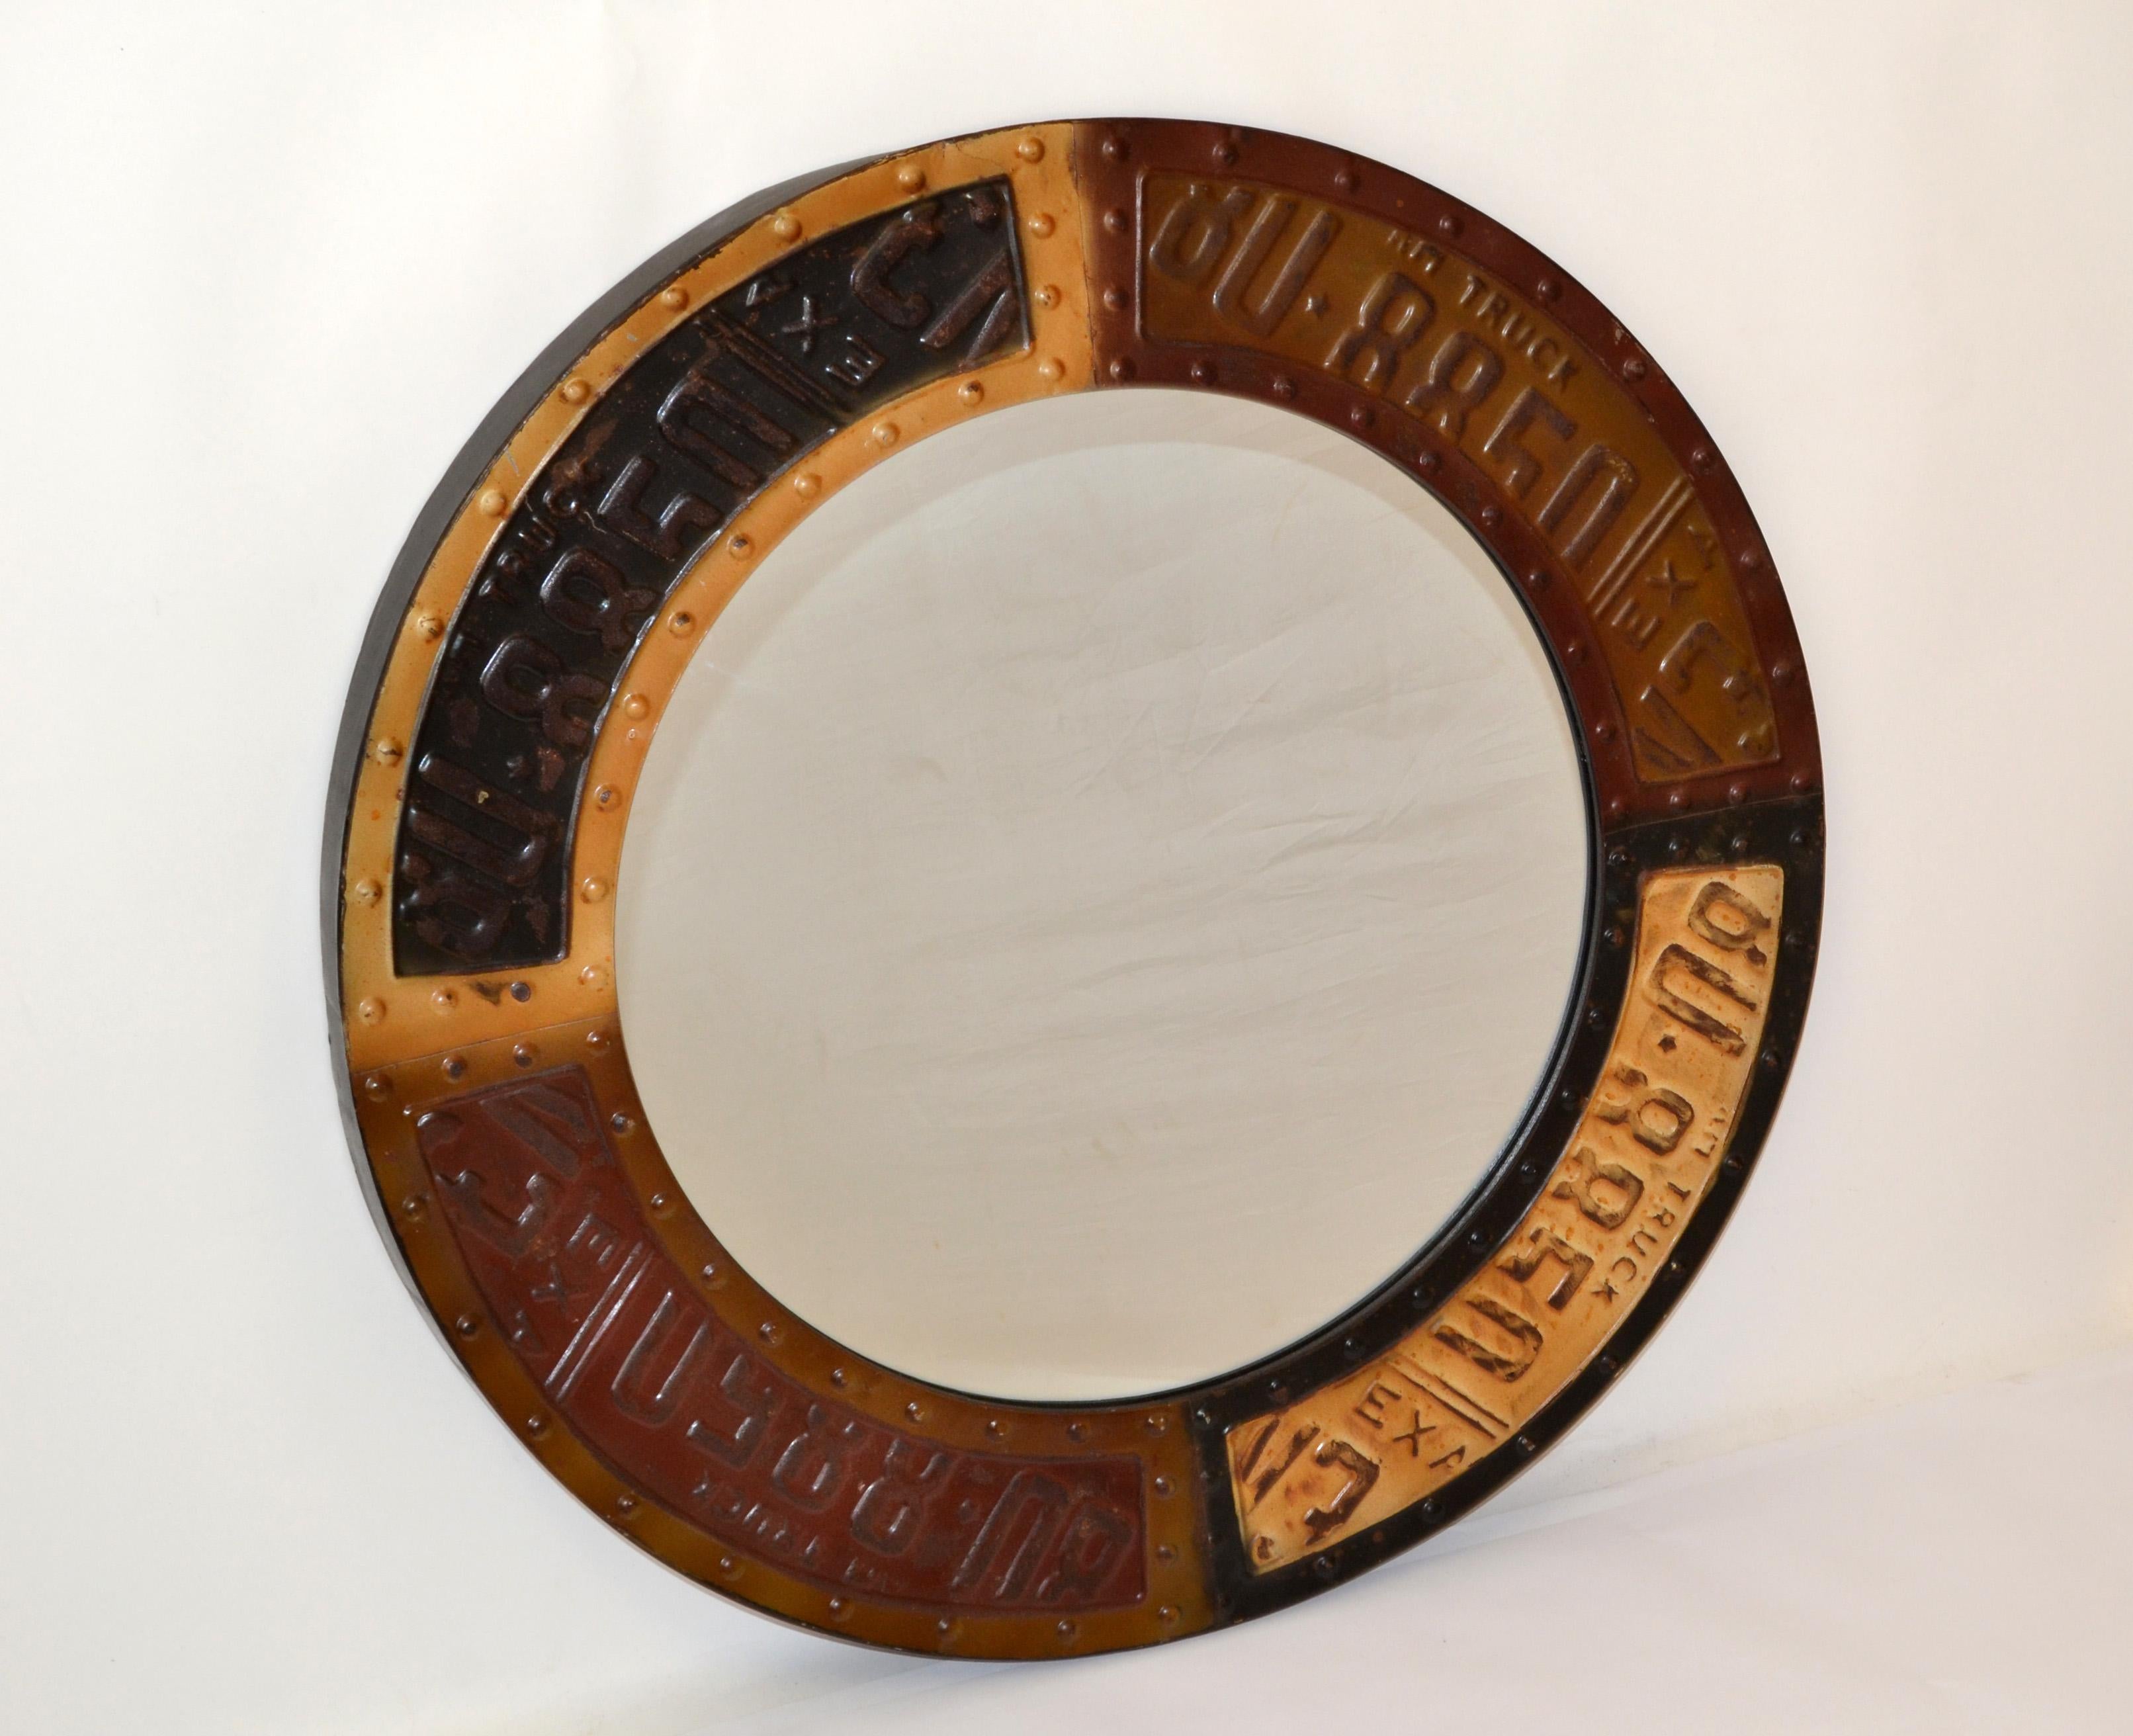 Hand-Painted 1980s Circular Brown Black Metal Accent Mirror Rustic Texas Trucker Road Theme